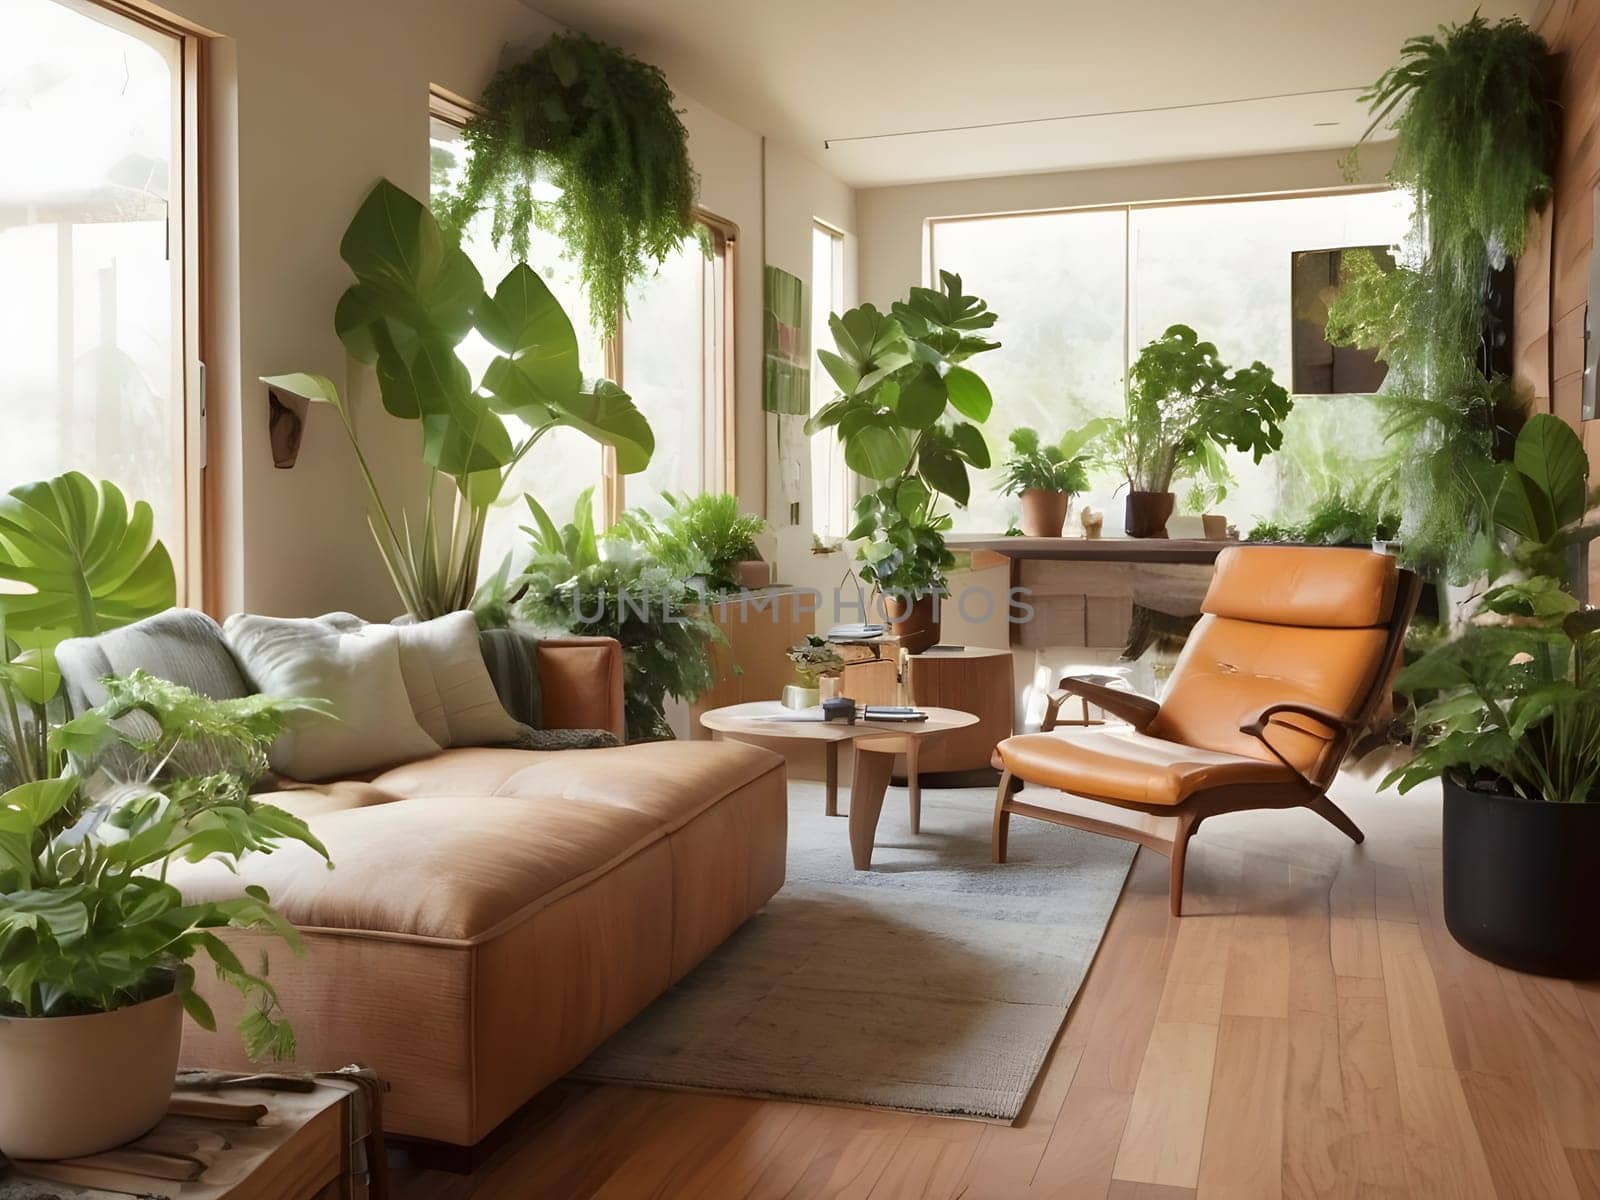 Ecologists incorporating sustainable elements into their homes, such as indoor plants, recycled furniture, and energy-efficient appliances.